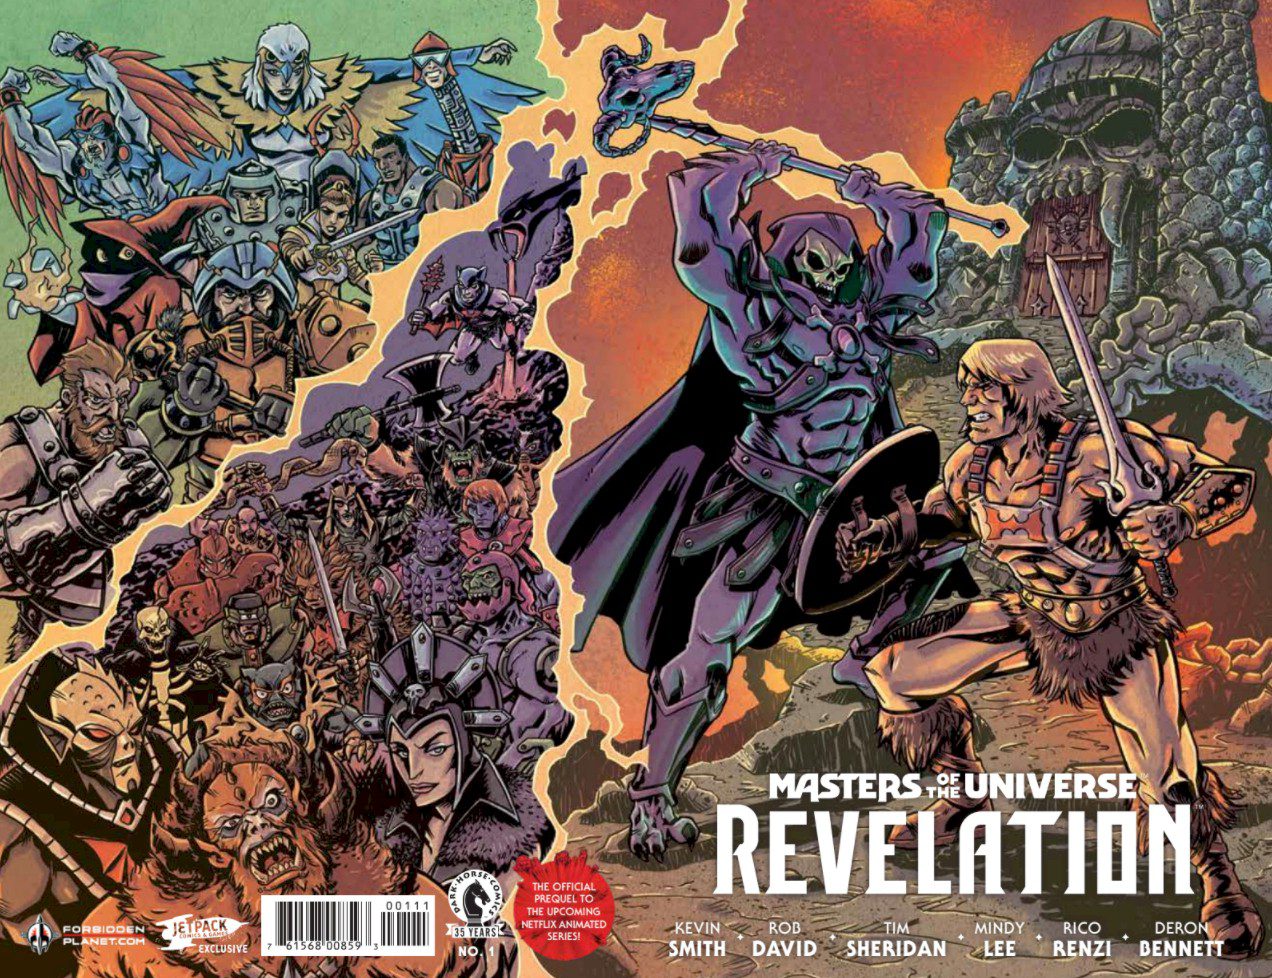 The Masters of the Universe Book